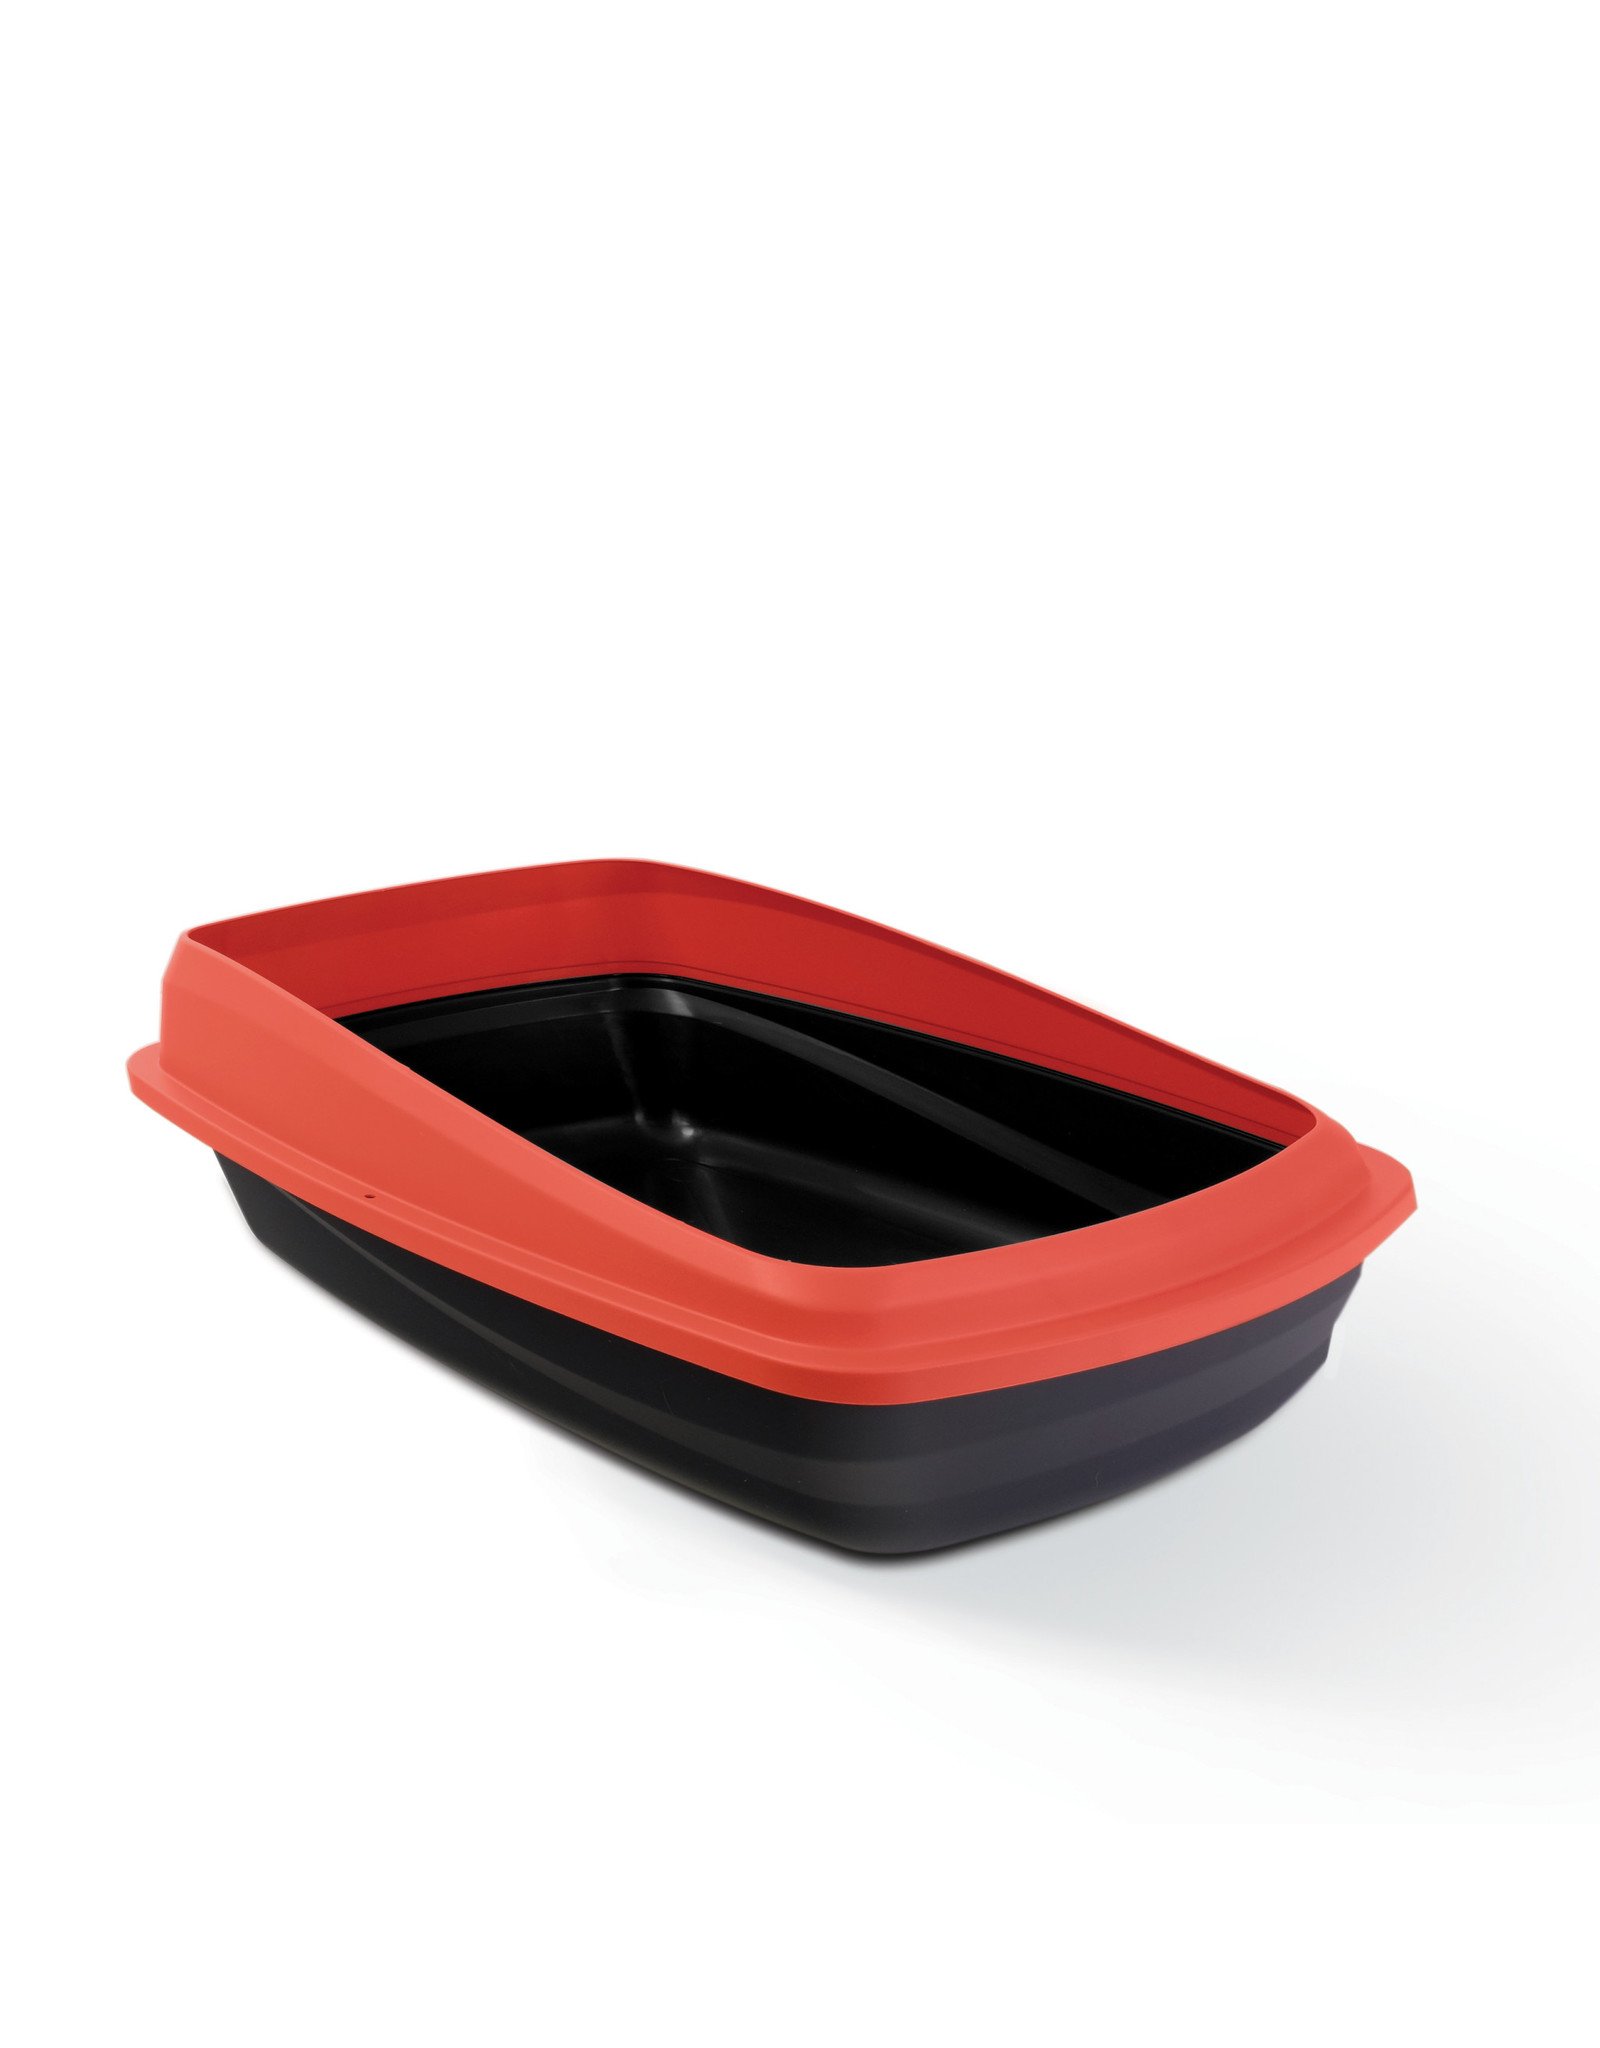 CatIt Cat Pan with Removable Rim Large Red/Charcoal